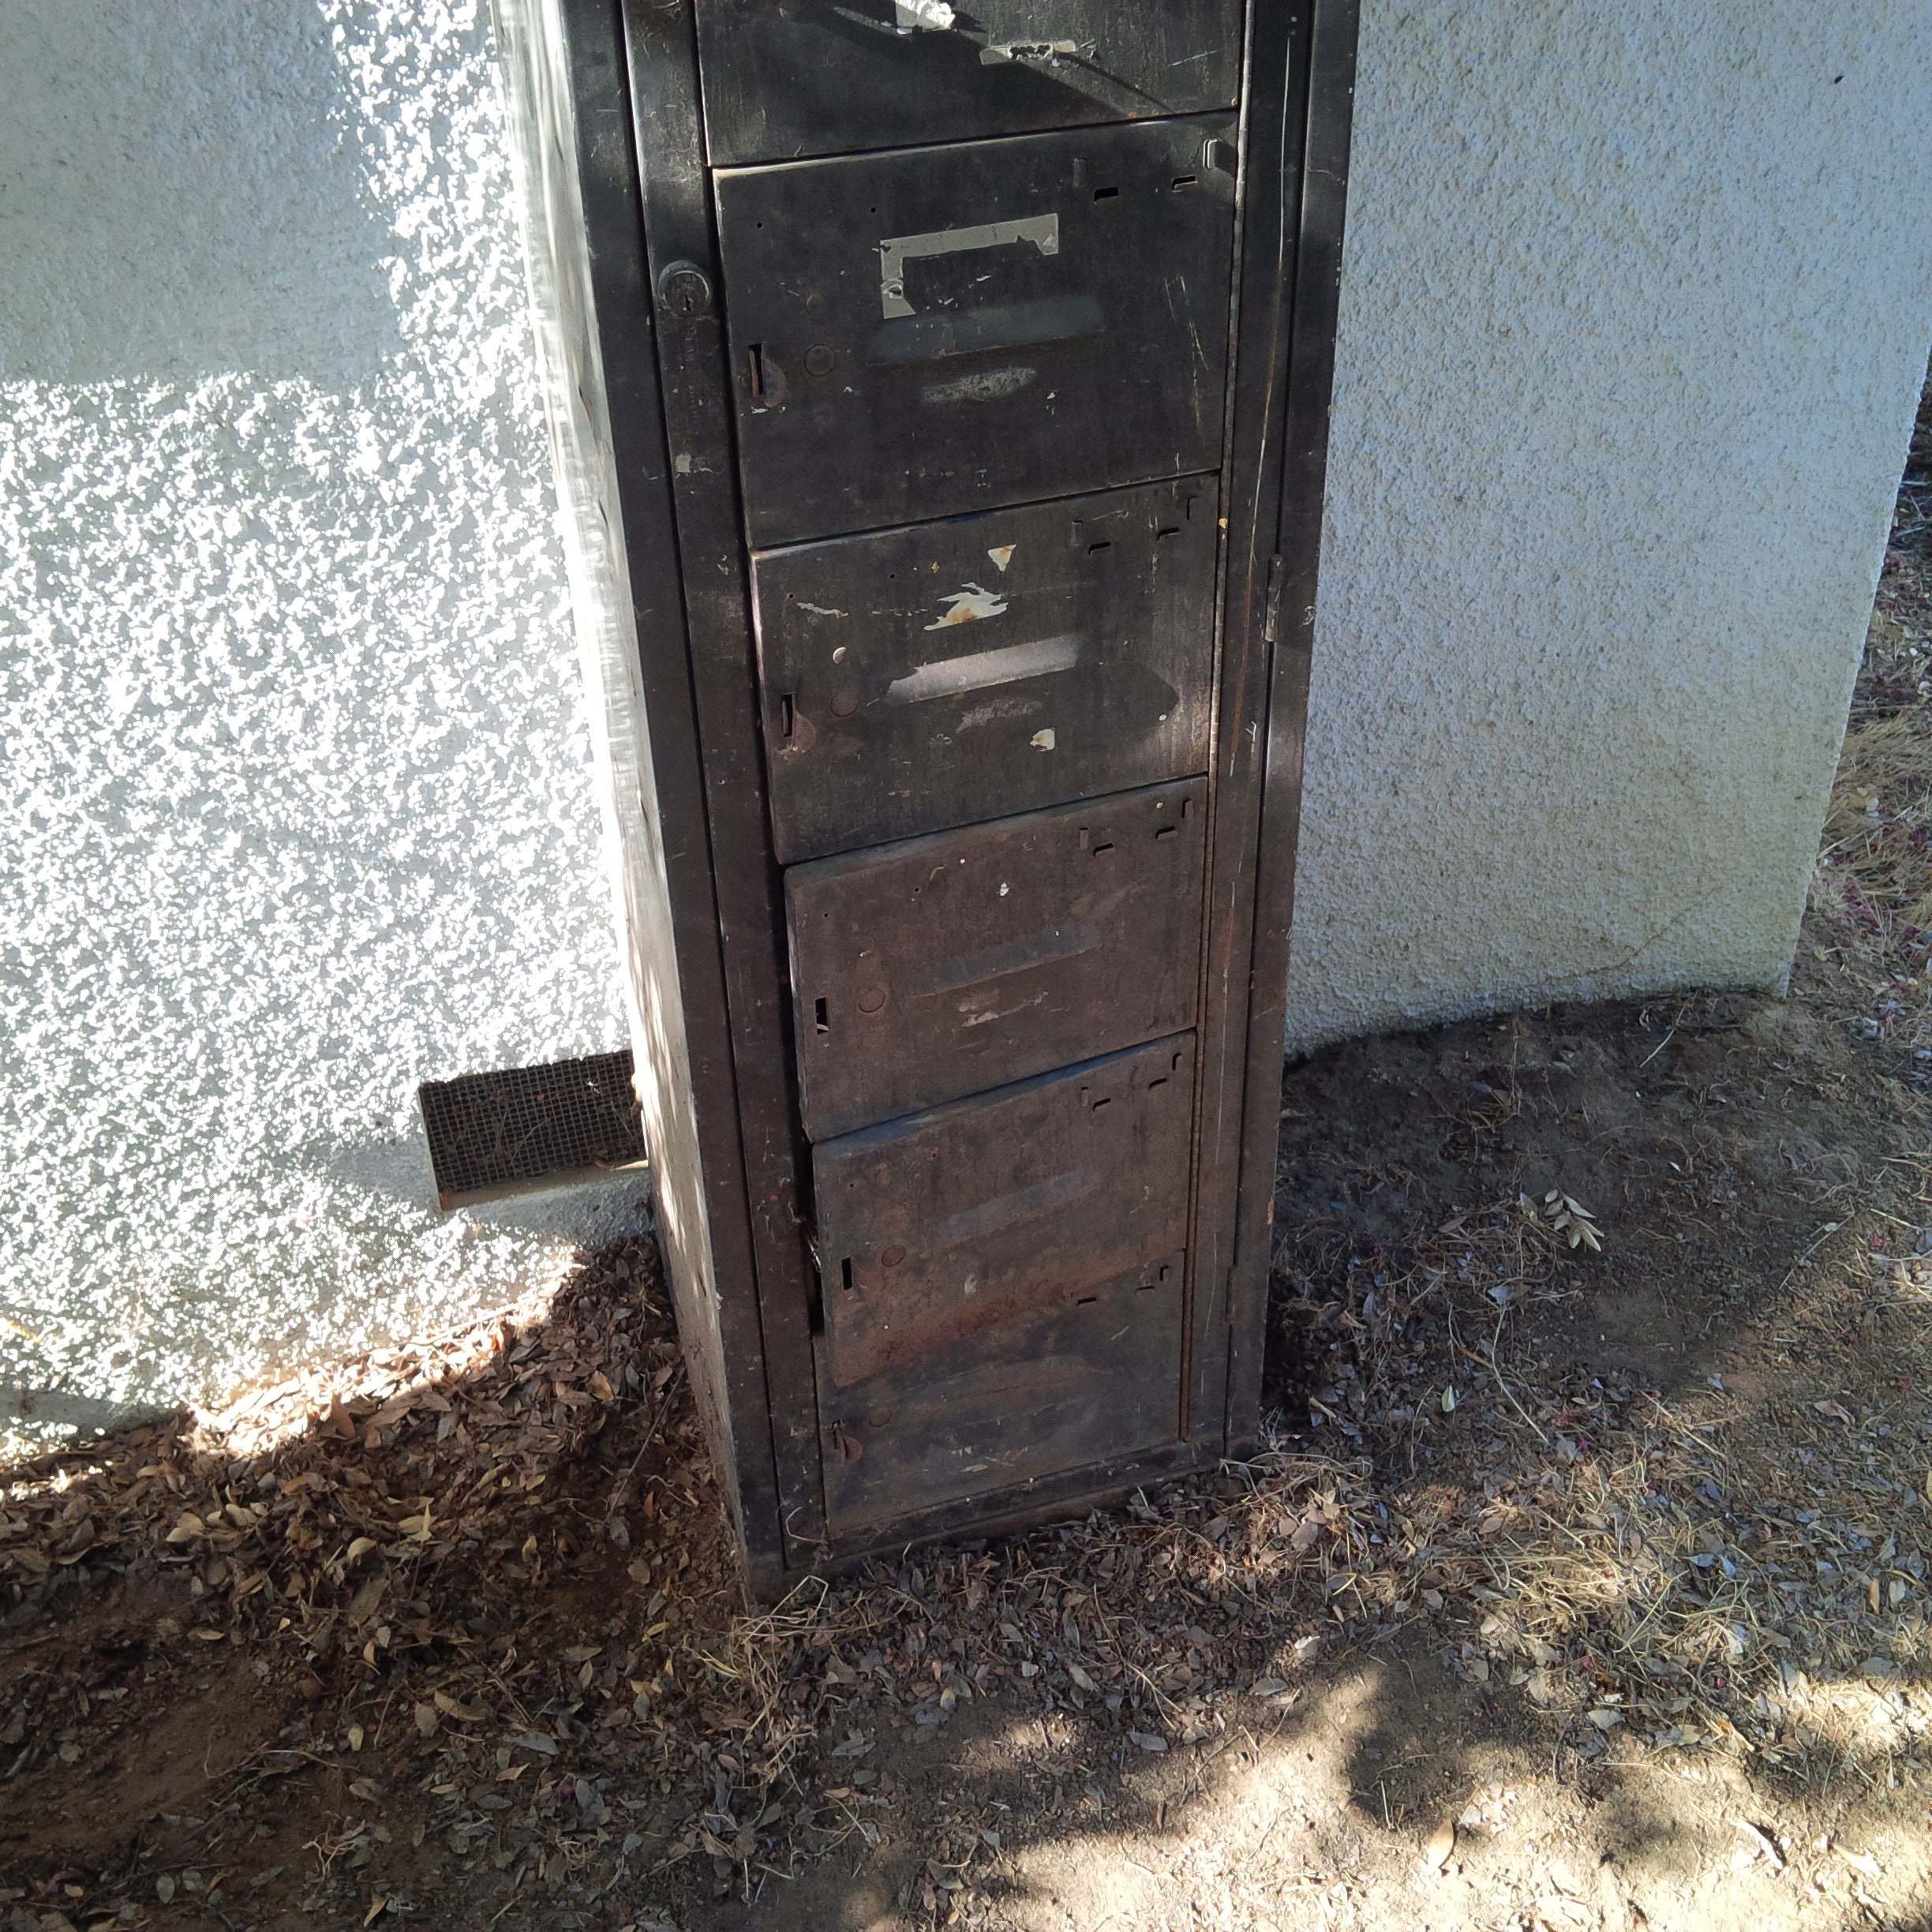 CA Local Pick Rust & Black - Compartment // up Cabinets 10 Gym // Available Damage Metal Etsy School Locker Vintage 